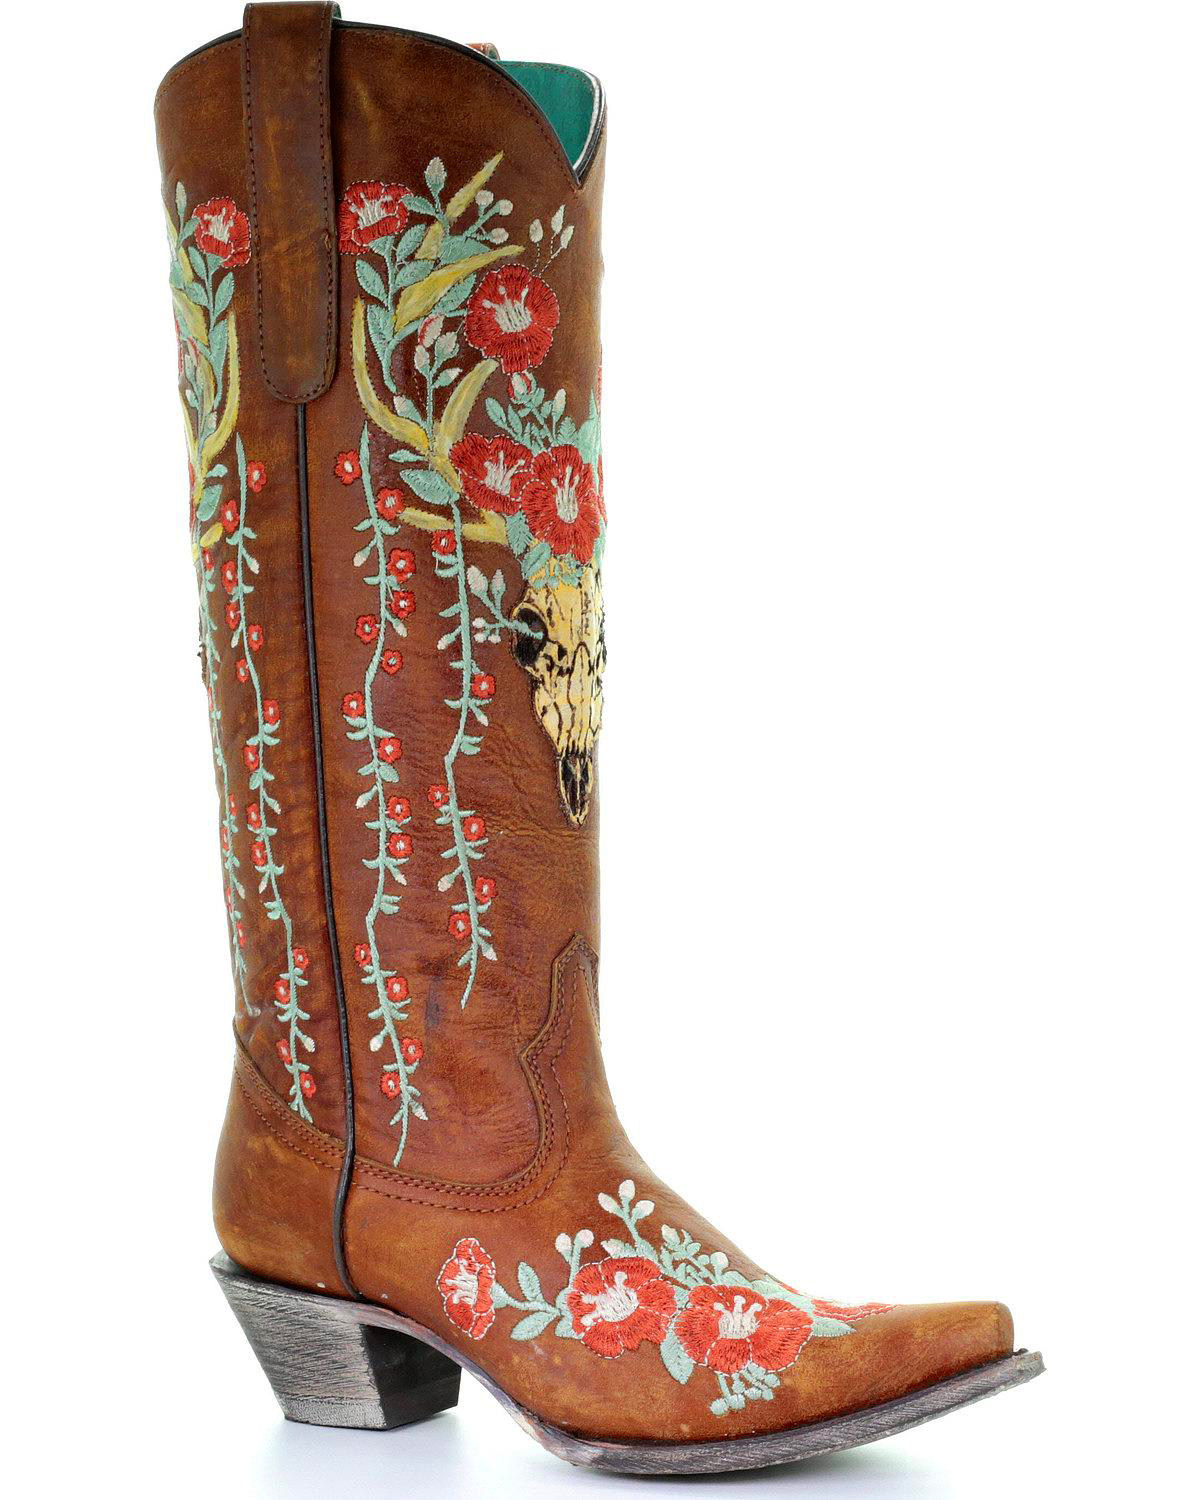 Corral Women's Deer Skull & Floral Embroidery Cowgirl Boots - Snip Toe ...